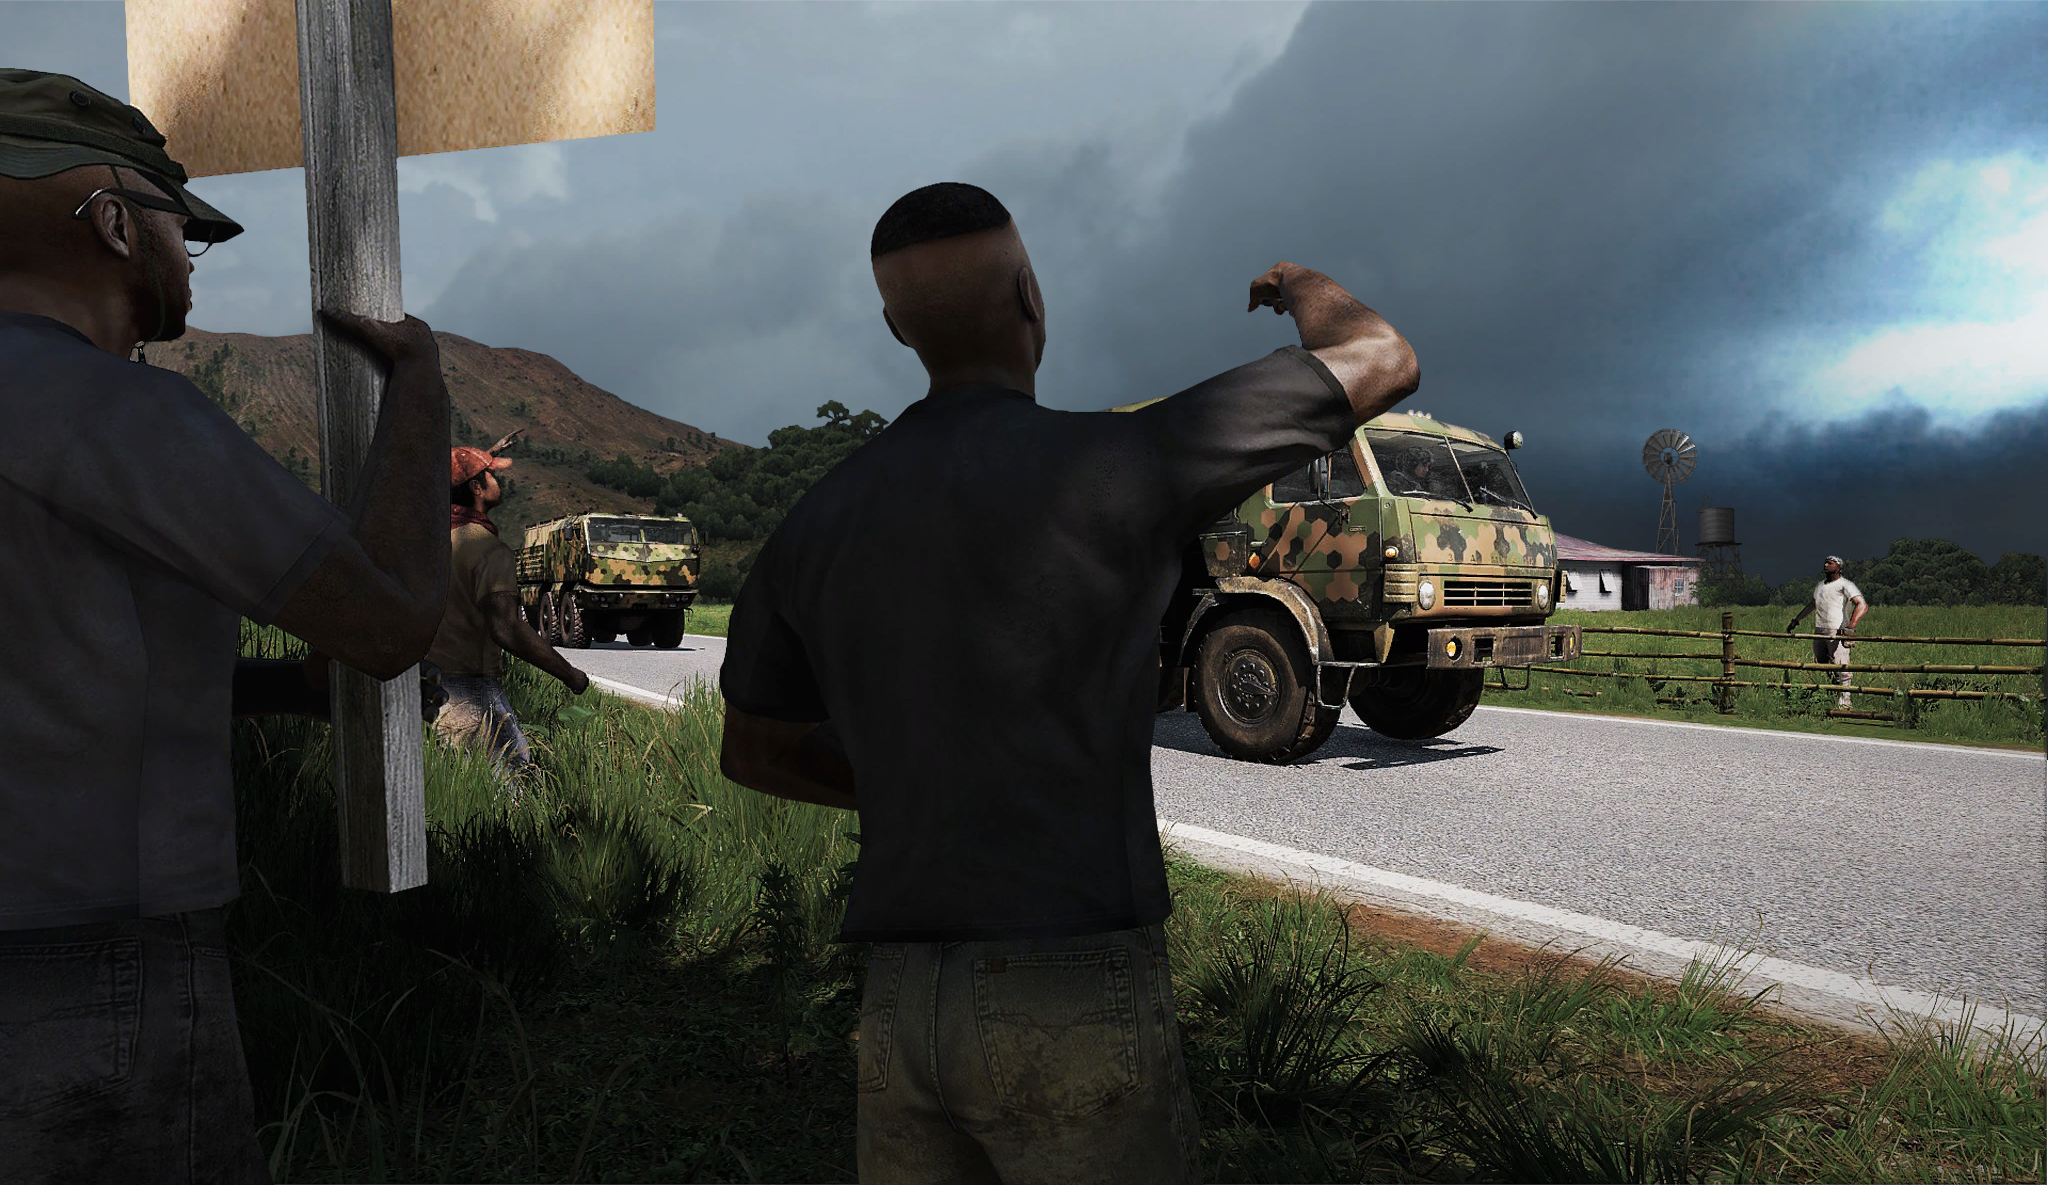 Arma 3 Apex: Old Man is a free, RPG-inspired Arma mission